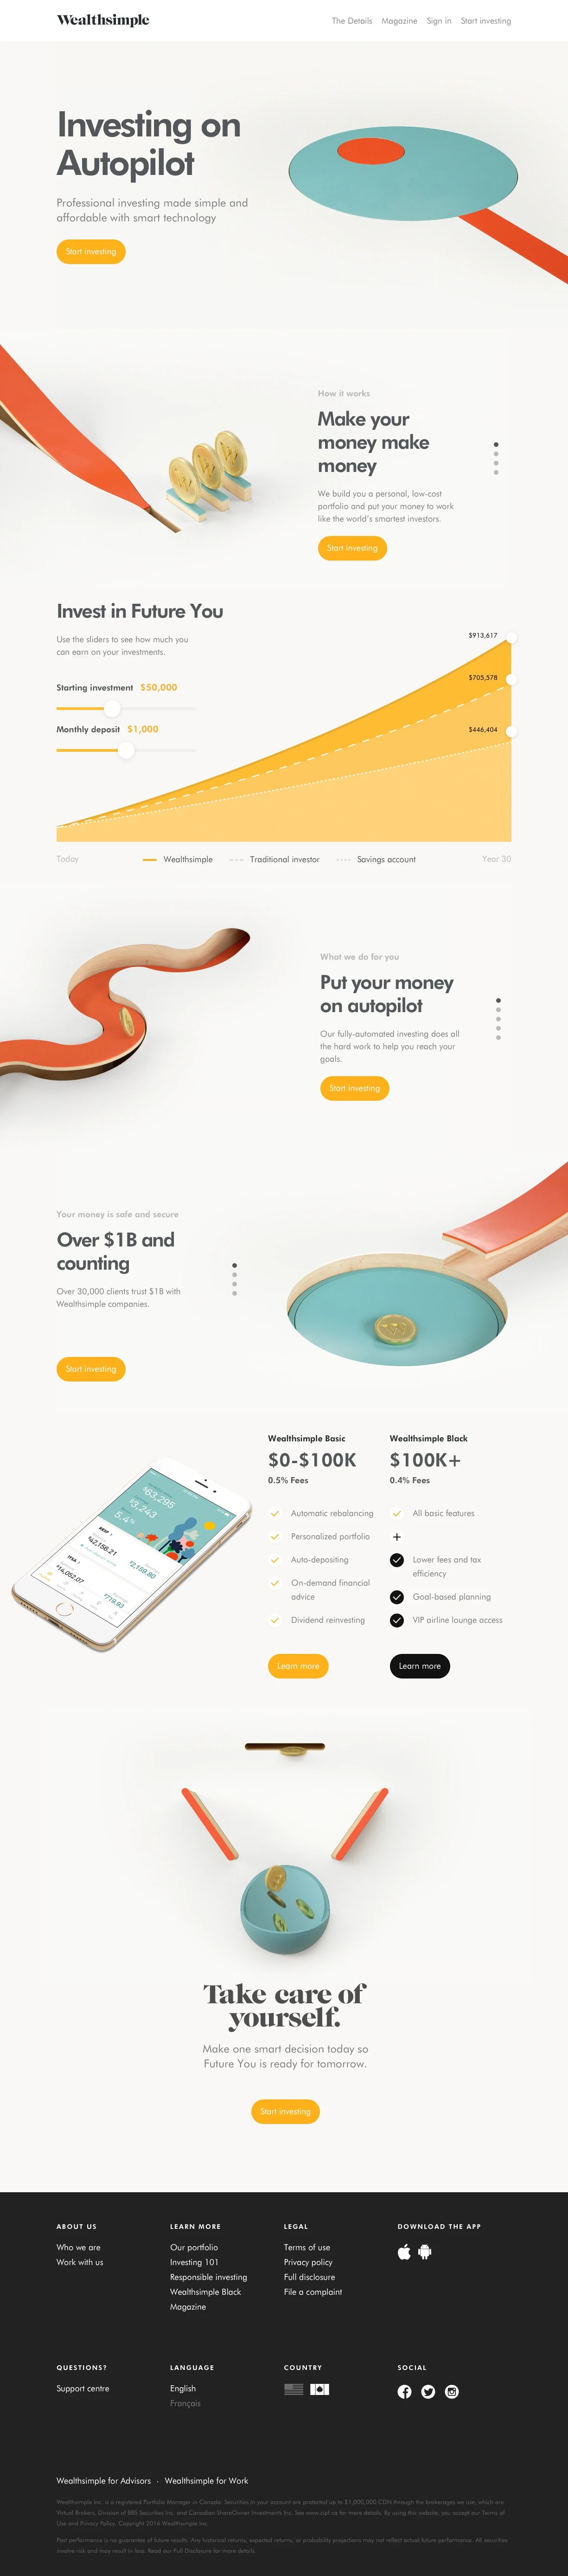 Wealthsimple Landing Page Example: Professional investing made simple and affordable with smart technology